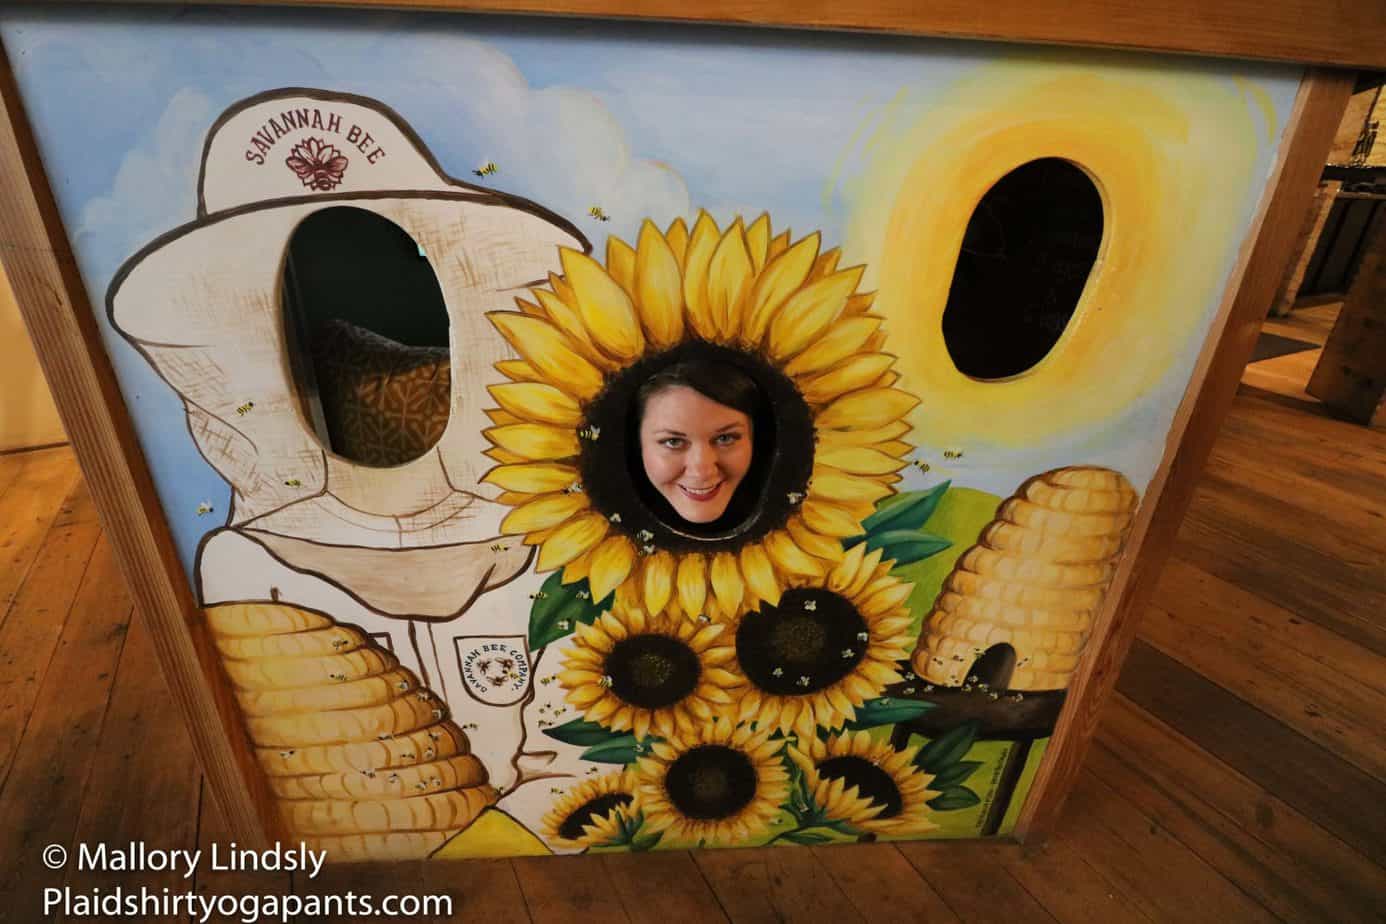 Mallory in a sunflower face cut out at Savannah Bee Company